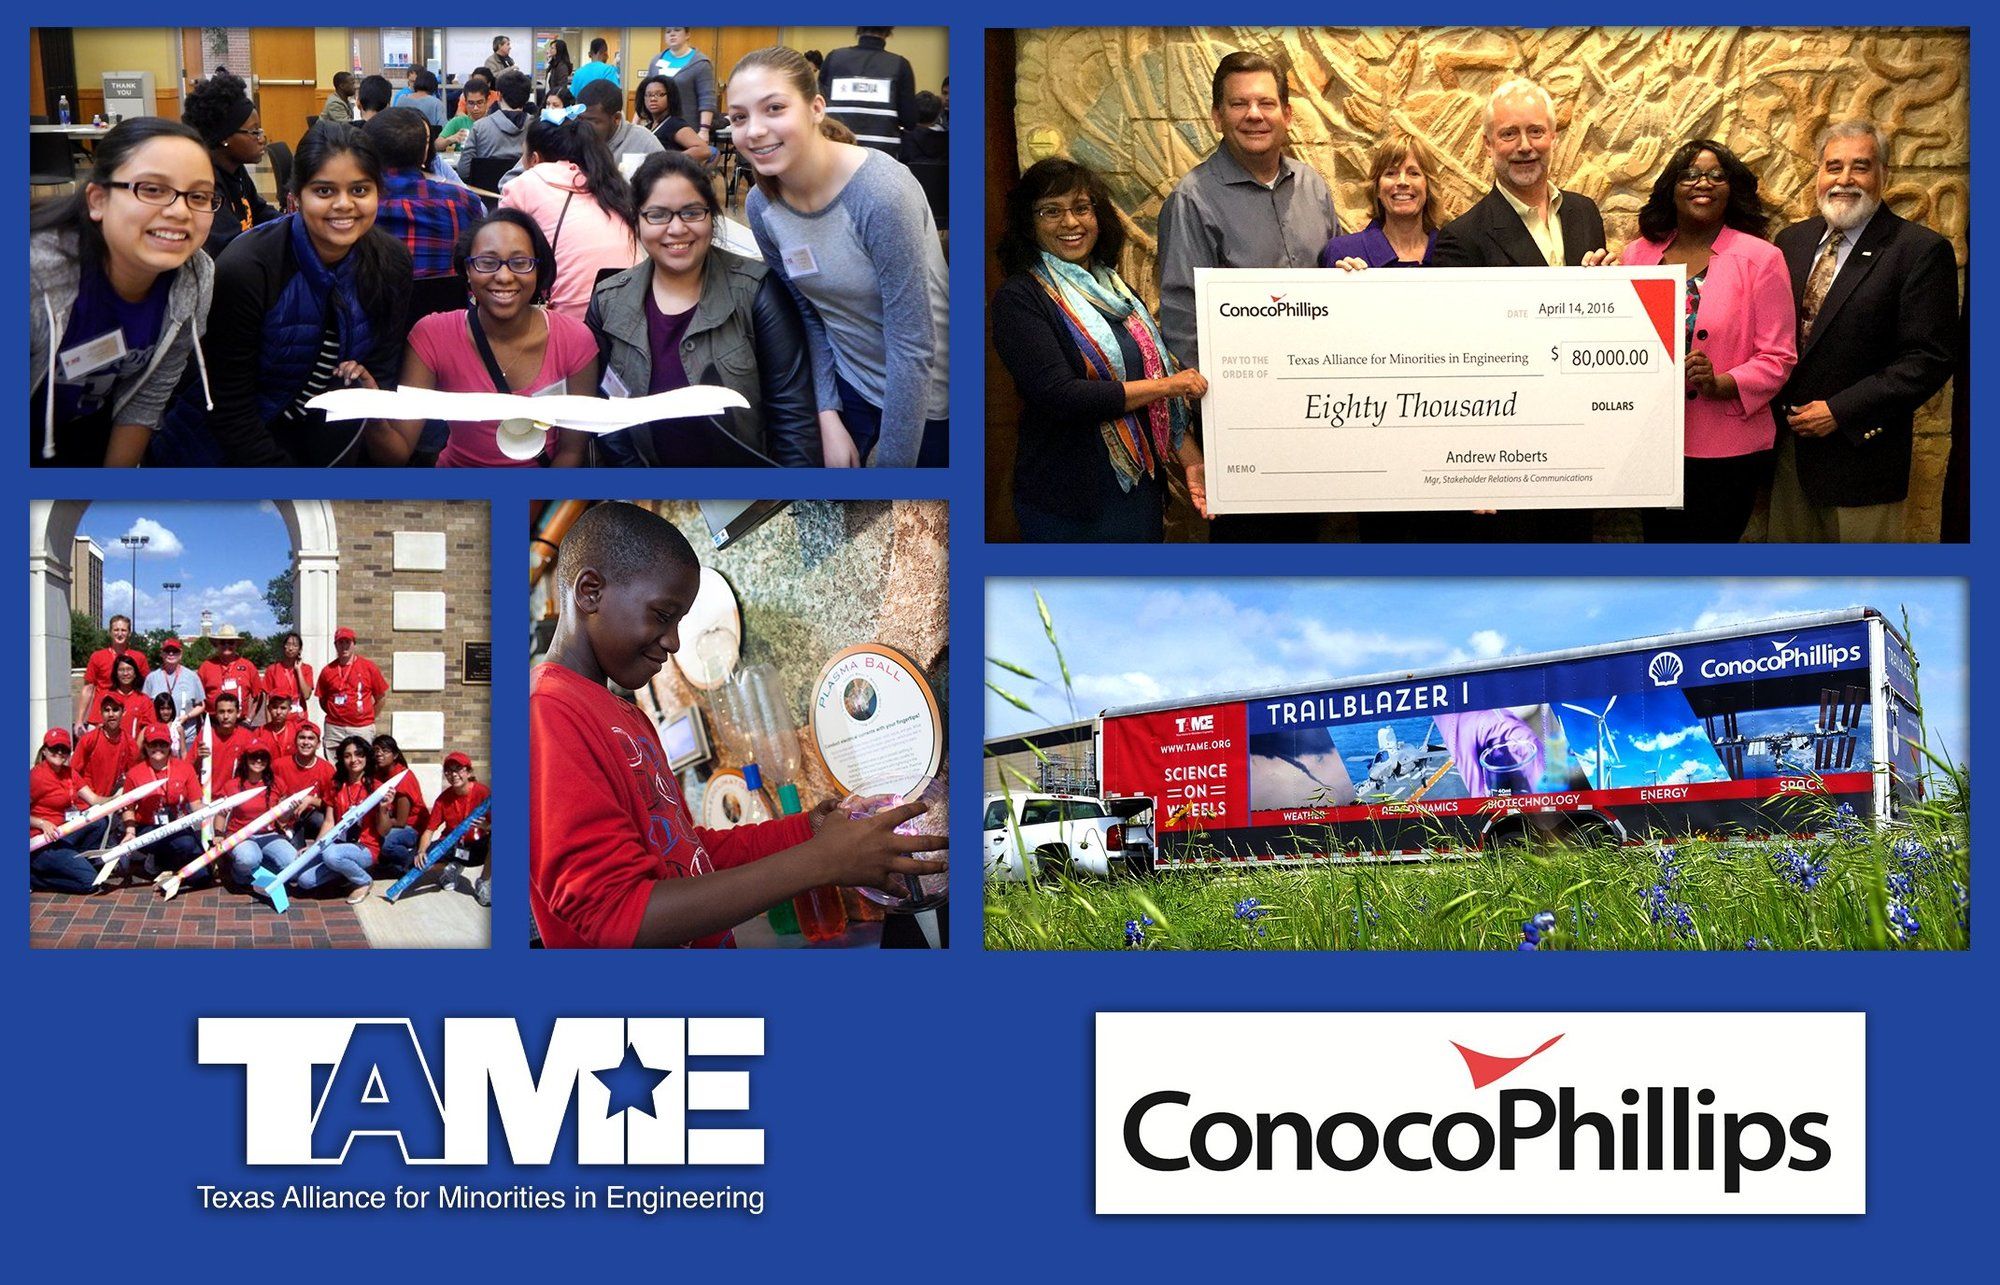 The Texas Alliance for Minorities in Engineering (TAME) is proud to announce that partner ConocoPhillips has generously awarded $80,000 to empower Texan students to pursue careers in science, technology, engineering and math. math, science, and engineering. 